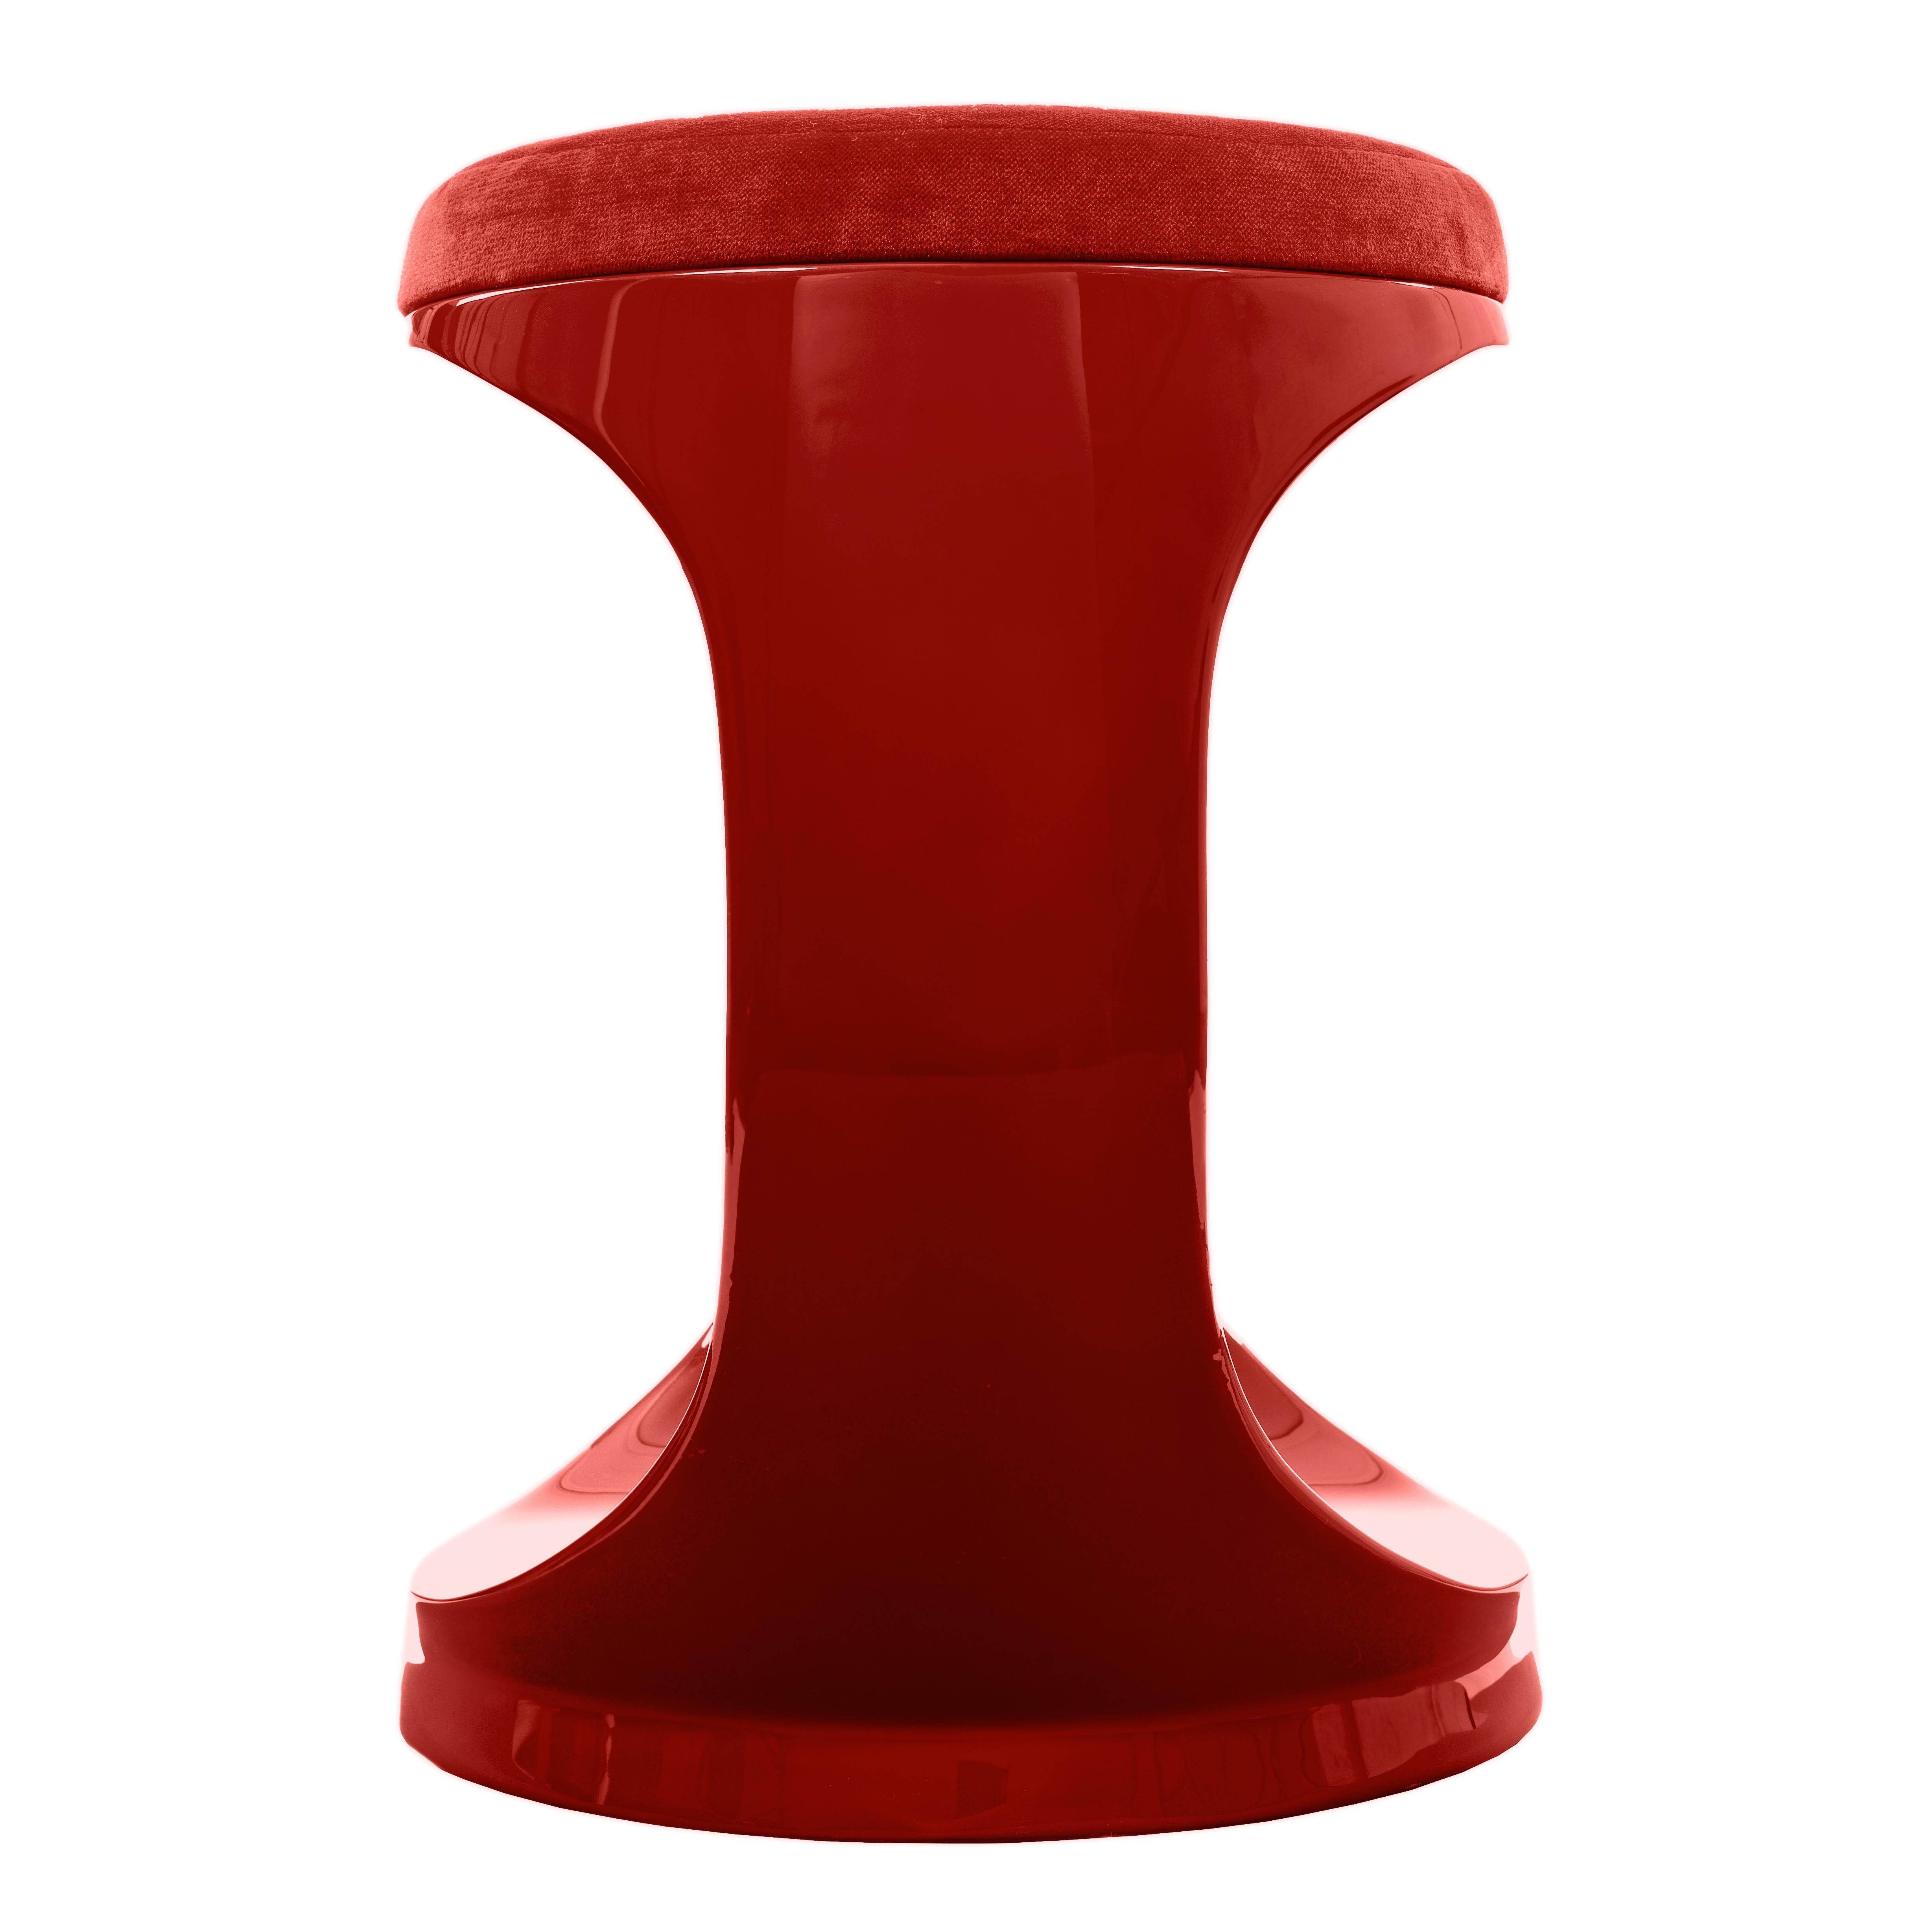 Contemporary Pouf by Cyril Rumpler Signet Ring, Hocker, Stool, red.
These stools are available in a dozen colors and in a glossy finish. The black, white, navy blue, pink, red, turquoise, lilac, brown, green, and grey stools are available with a